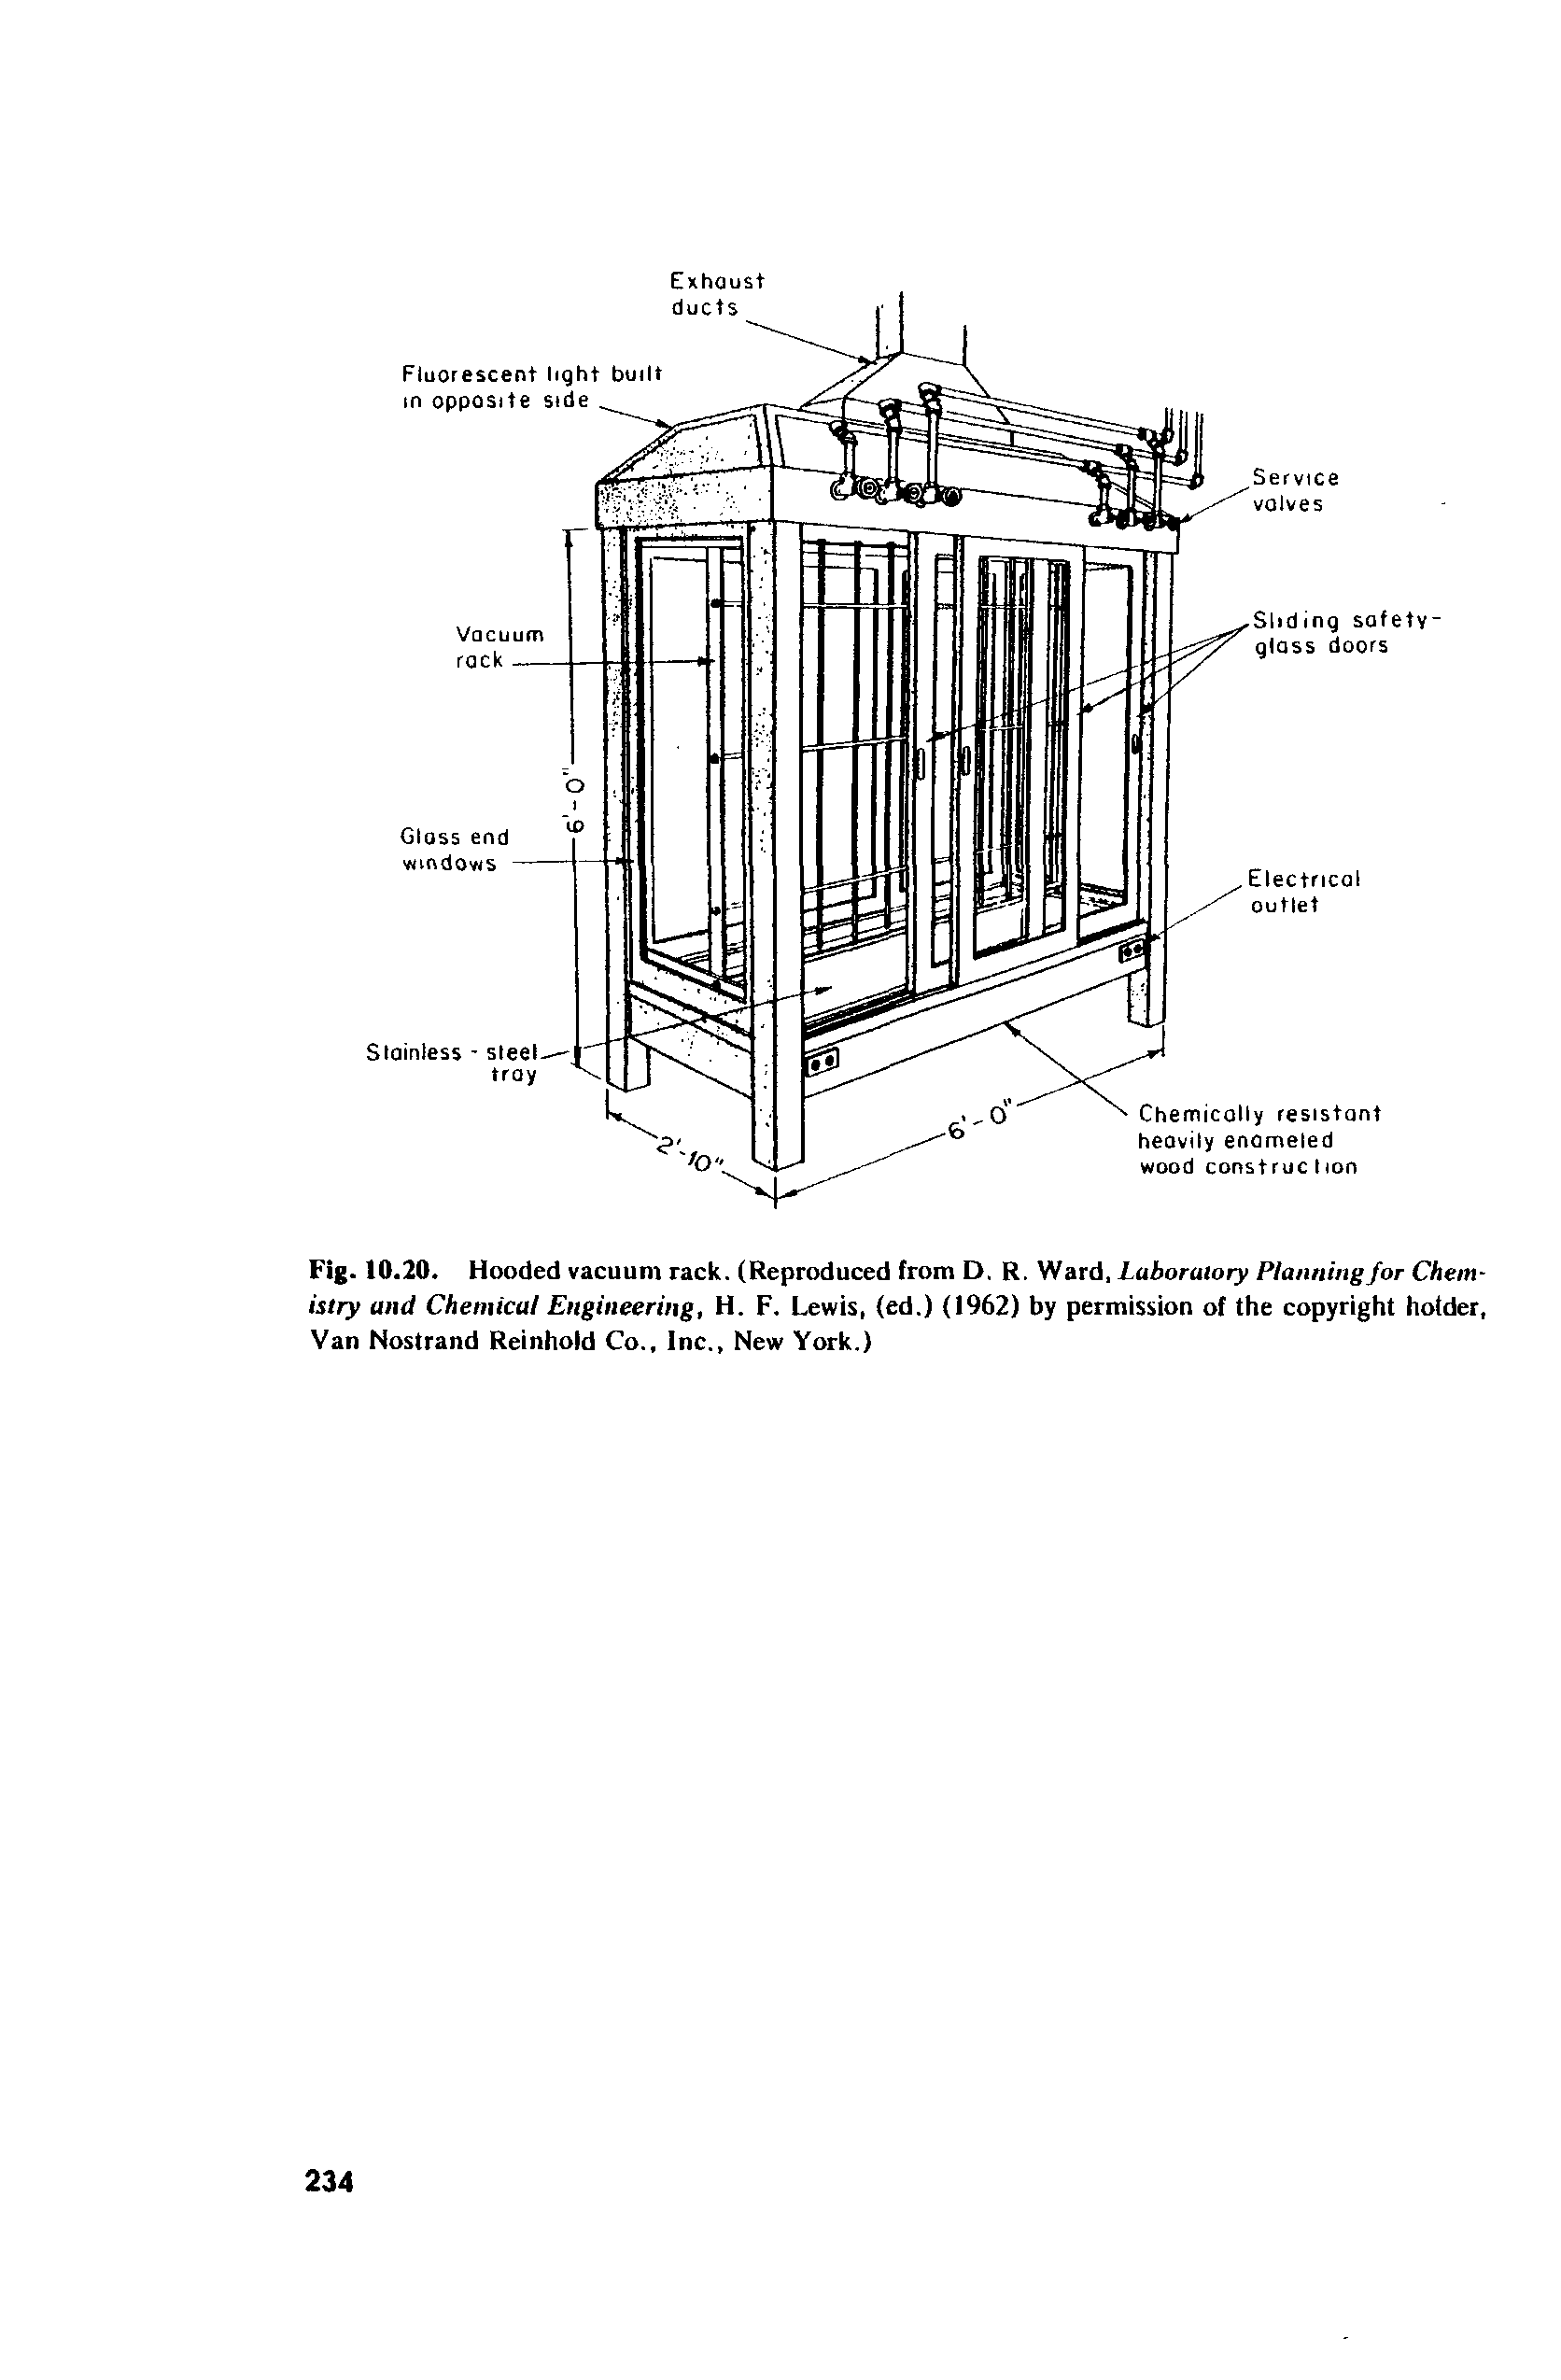 Fig. 10.20. Hooded vacuum rack. (Reproduced from D. R. Ward, Laboratory Planning for Chem-istry and Chemical Engineering, H. F. Lewis, (ed.) (1962) by permission of the copyright holder, Van Nostrand Reinhold Co., Inc., New York.)...